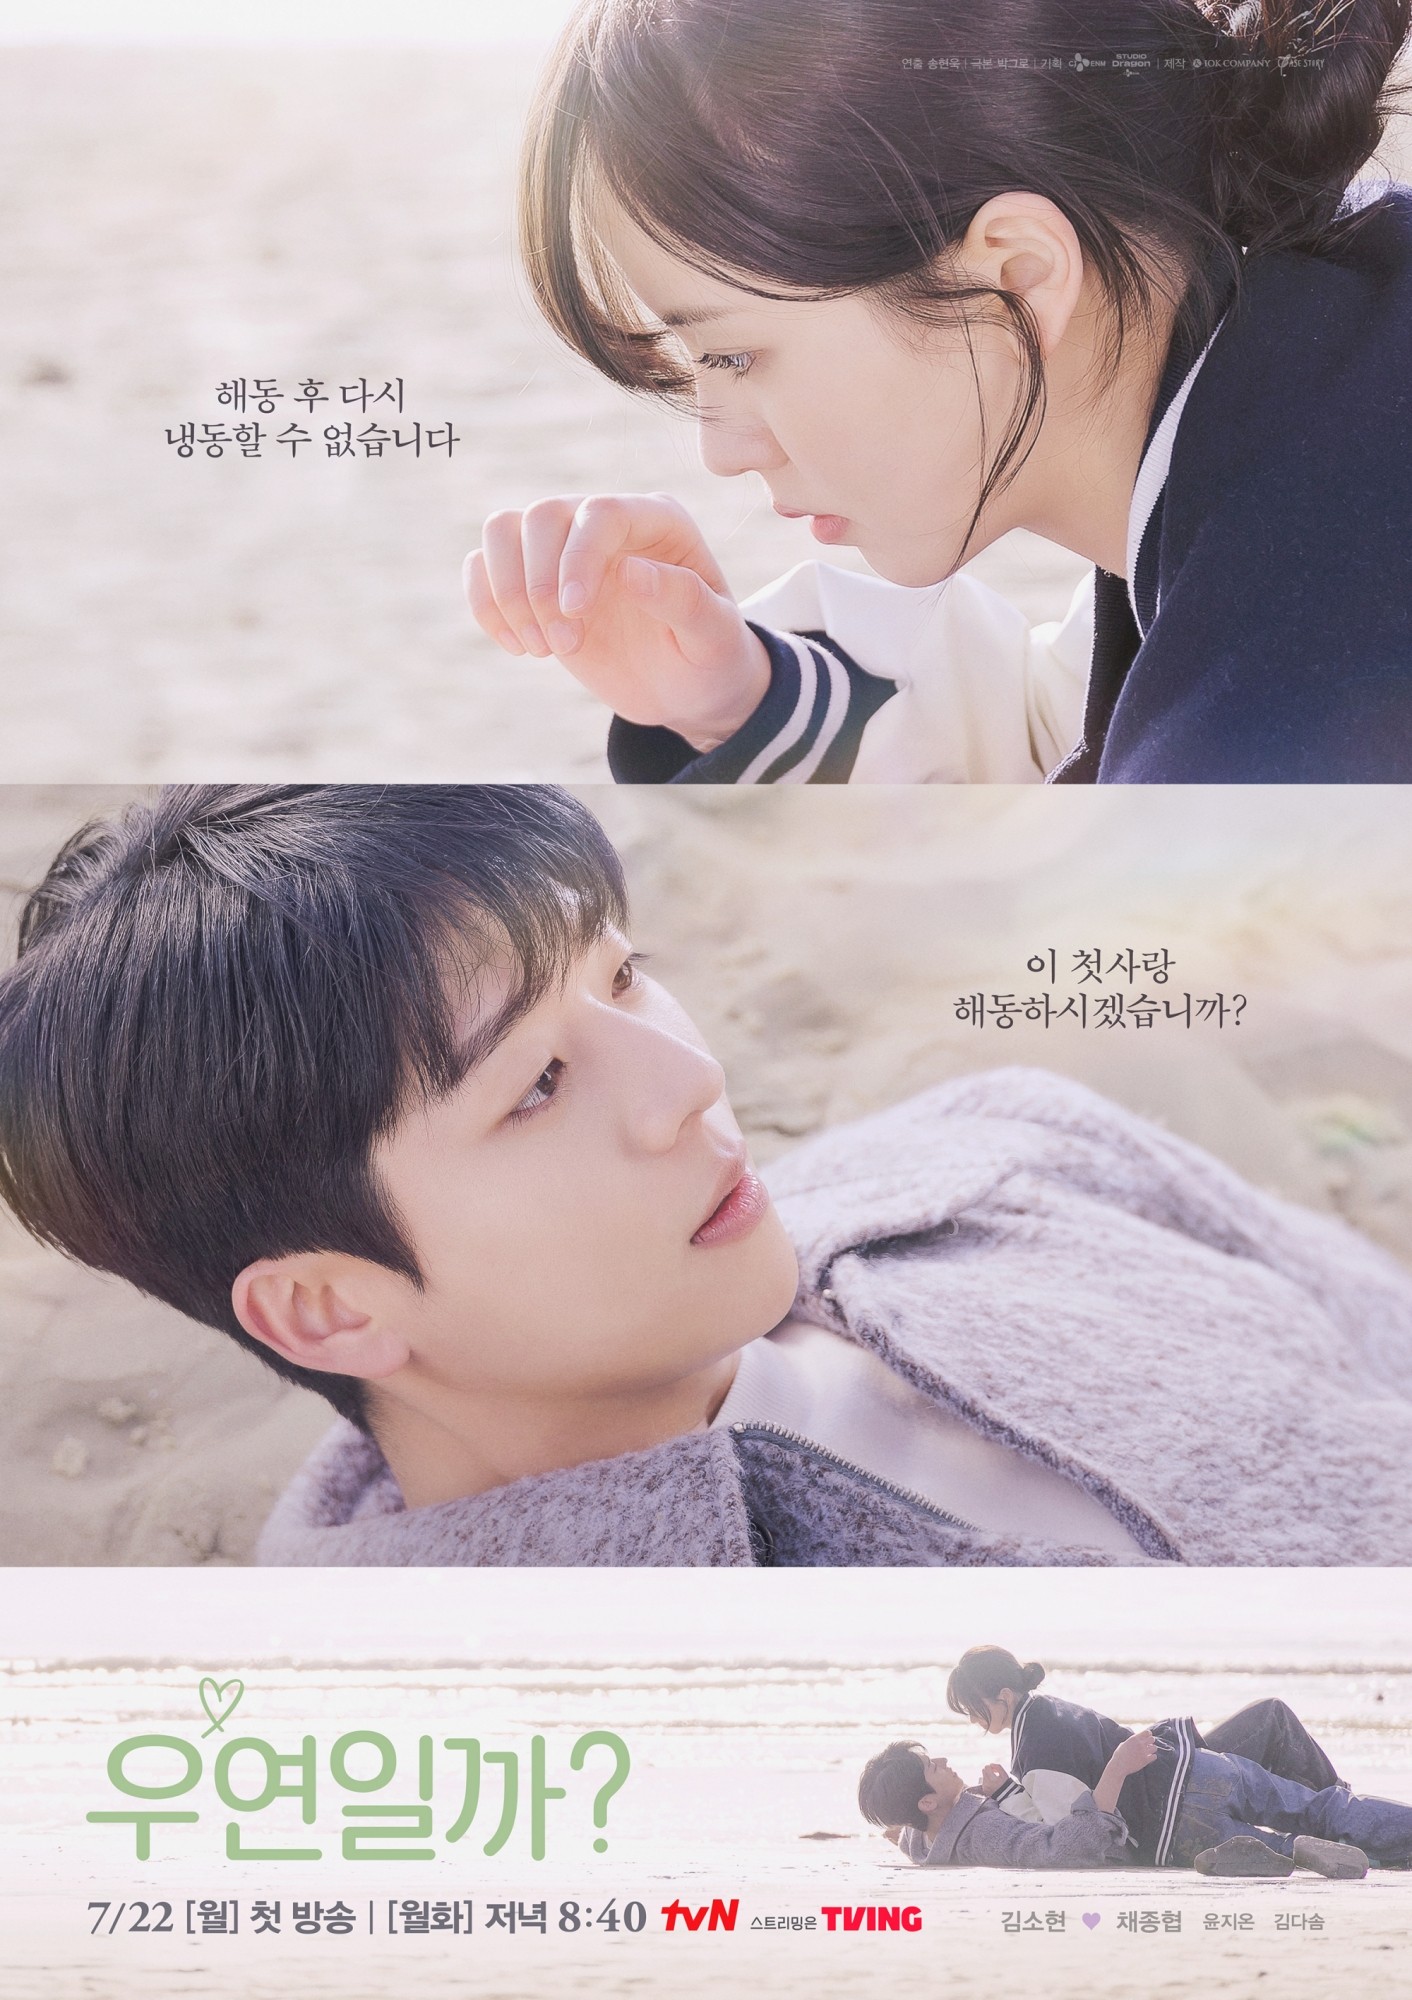 Kim So-Hyun X Chae Jong-Hyeop, Exciting Chemistry…’Is It a Coincidence?’, Reunion Poster